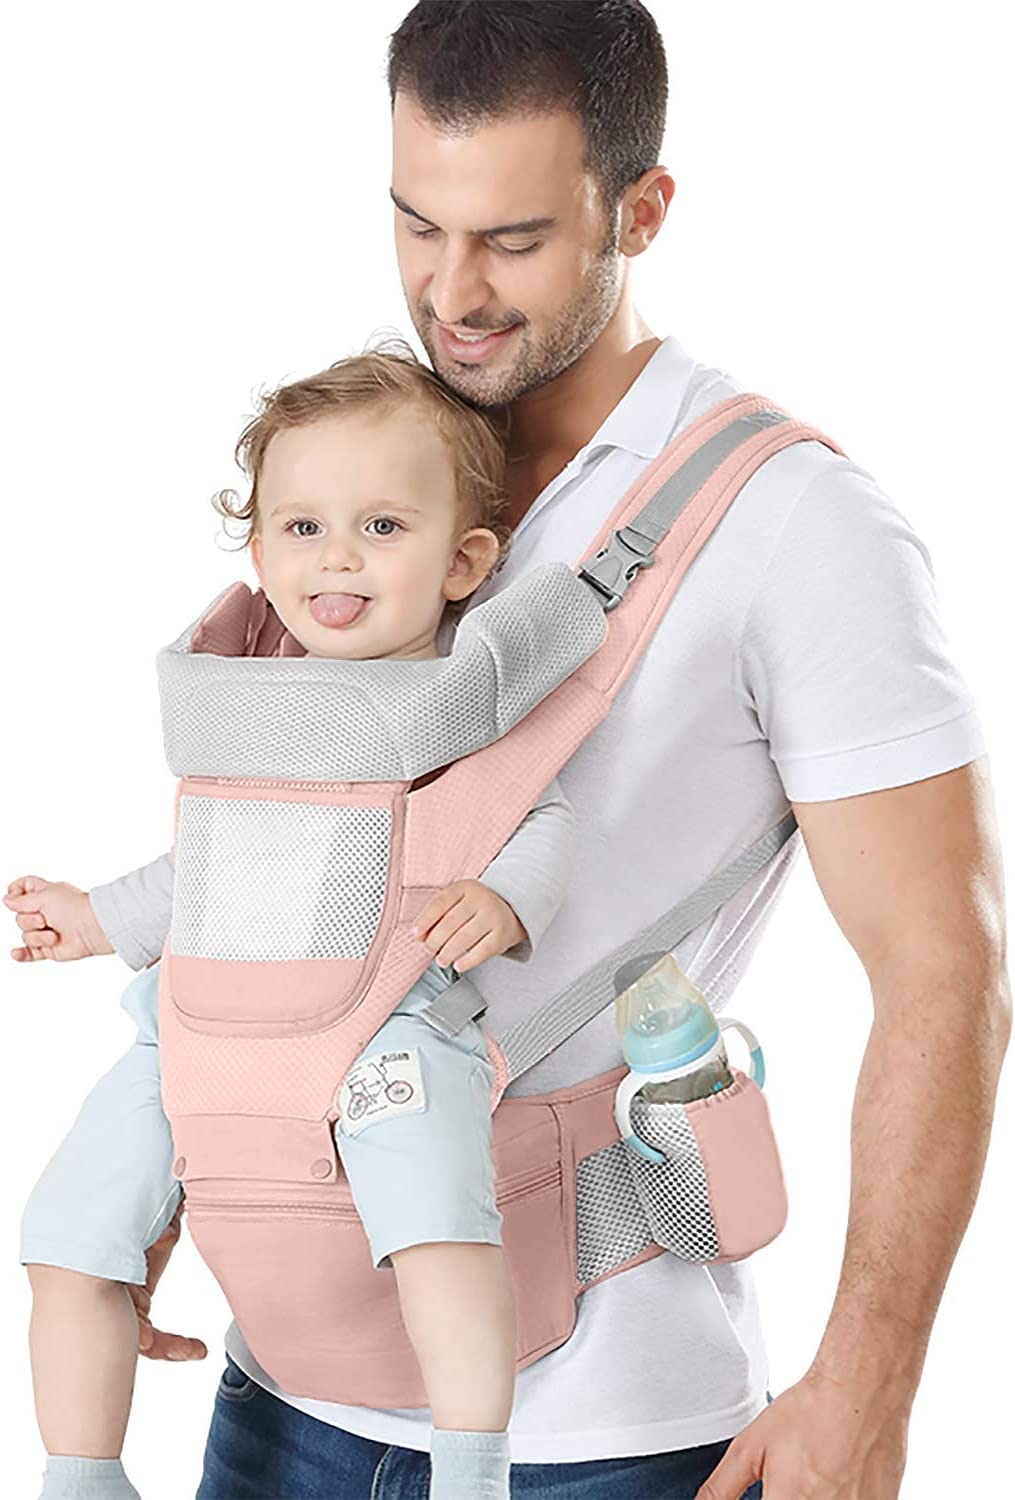 COOLBABY YEBD01 Versatile 6-in-1 Baby Travel System with Sturdy Waist - COOLBABY